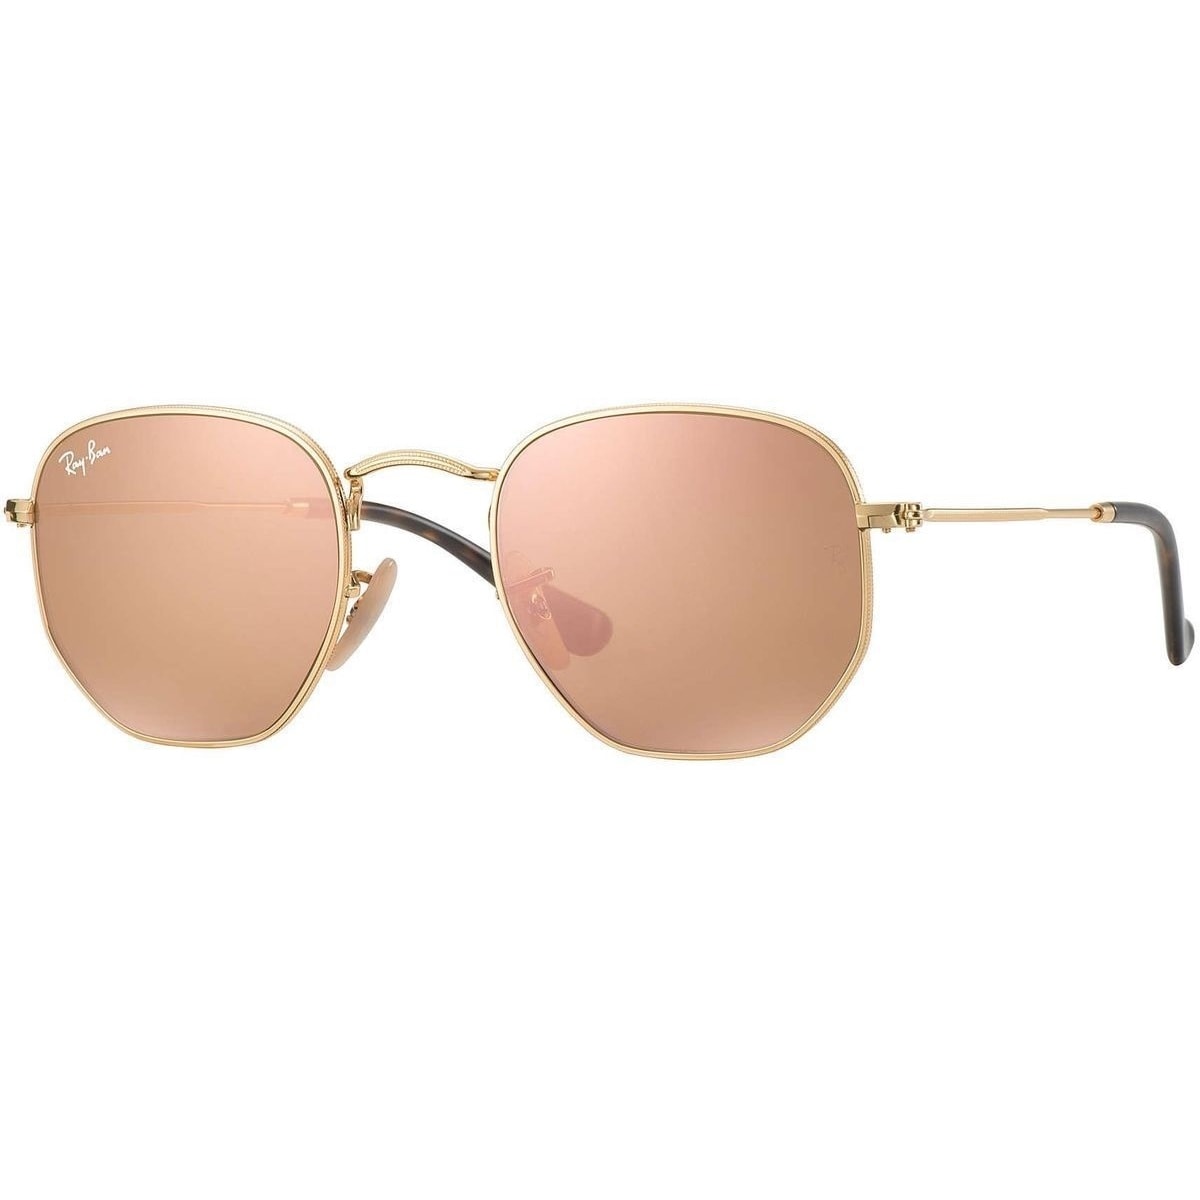 Ray Ban Hexagonal Flat Lenses Sunglasses Gold Copper Flash 51mm On Sale Overstock